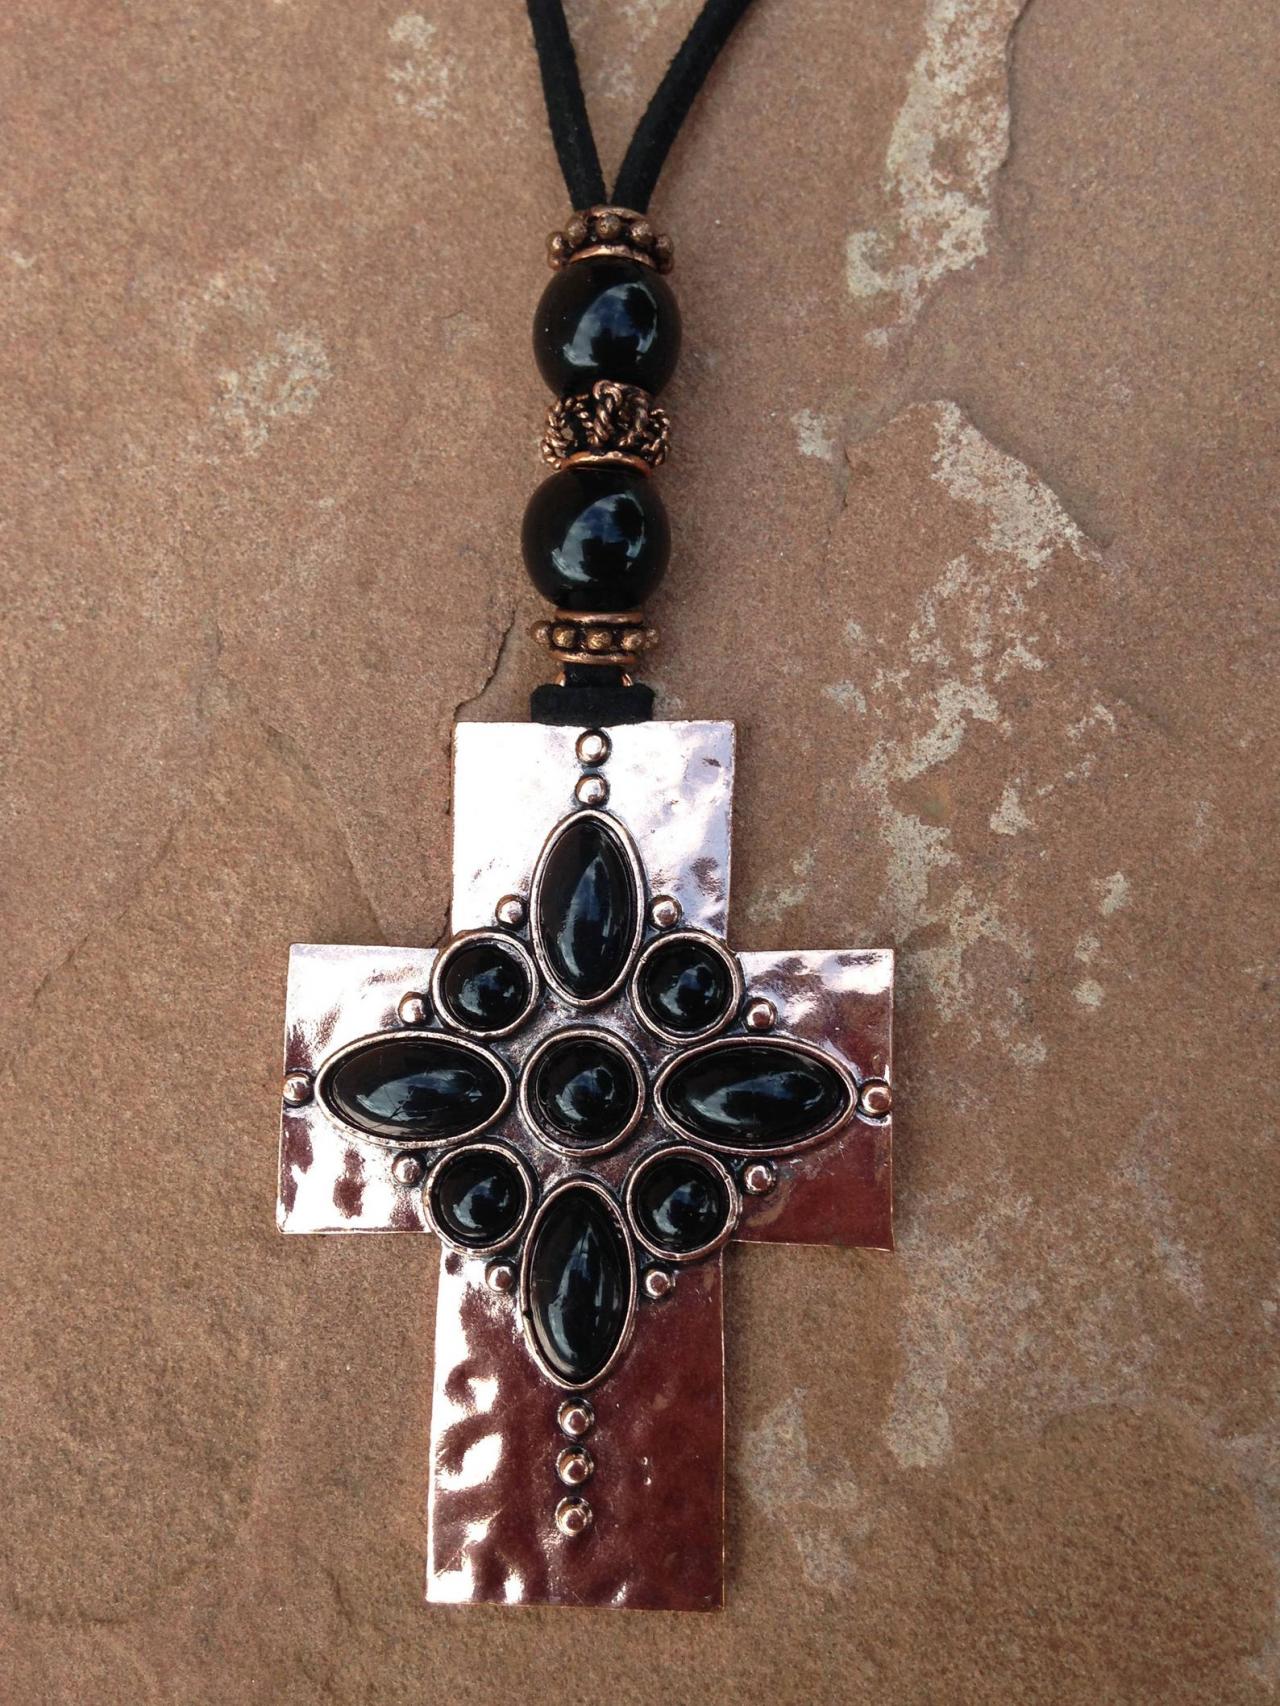 18" Fabric Cord With A Copper Like Metal Cross Pendant Embellished With Black Plastic Cabochons And A Copper S Clasp Closure